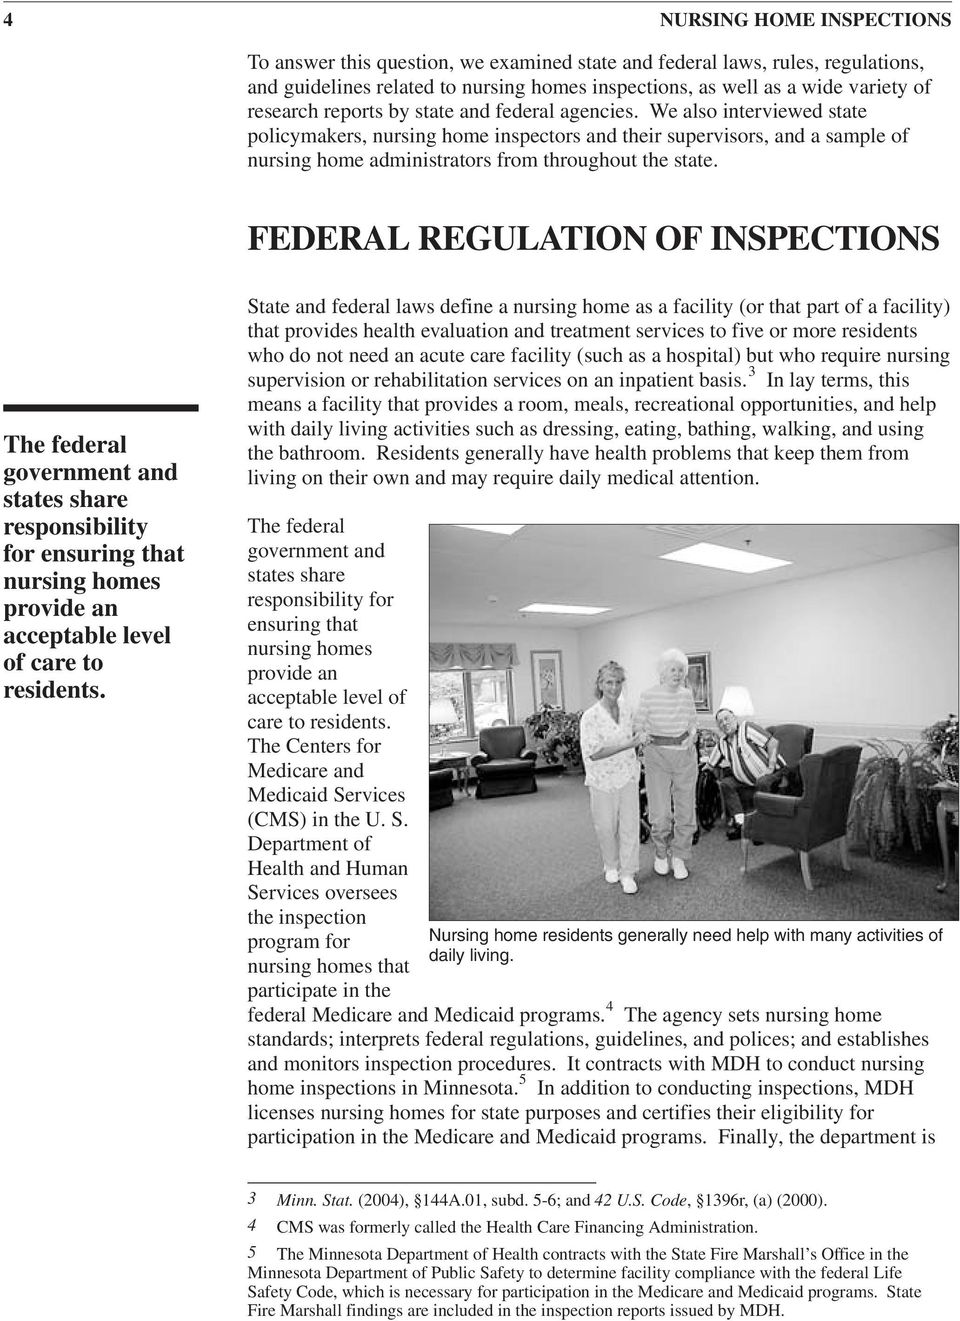 FEDERAL REGULATION OF INSPECTIONS The federal government and states share responsibility for ensuring that nursing homes provide an acceptable level of care to residents.